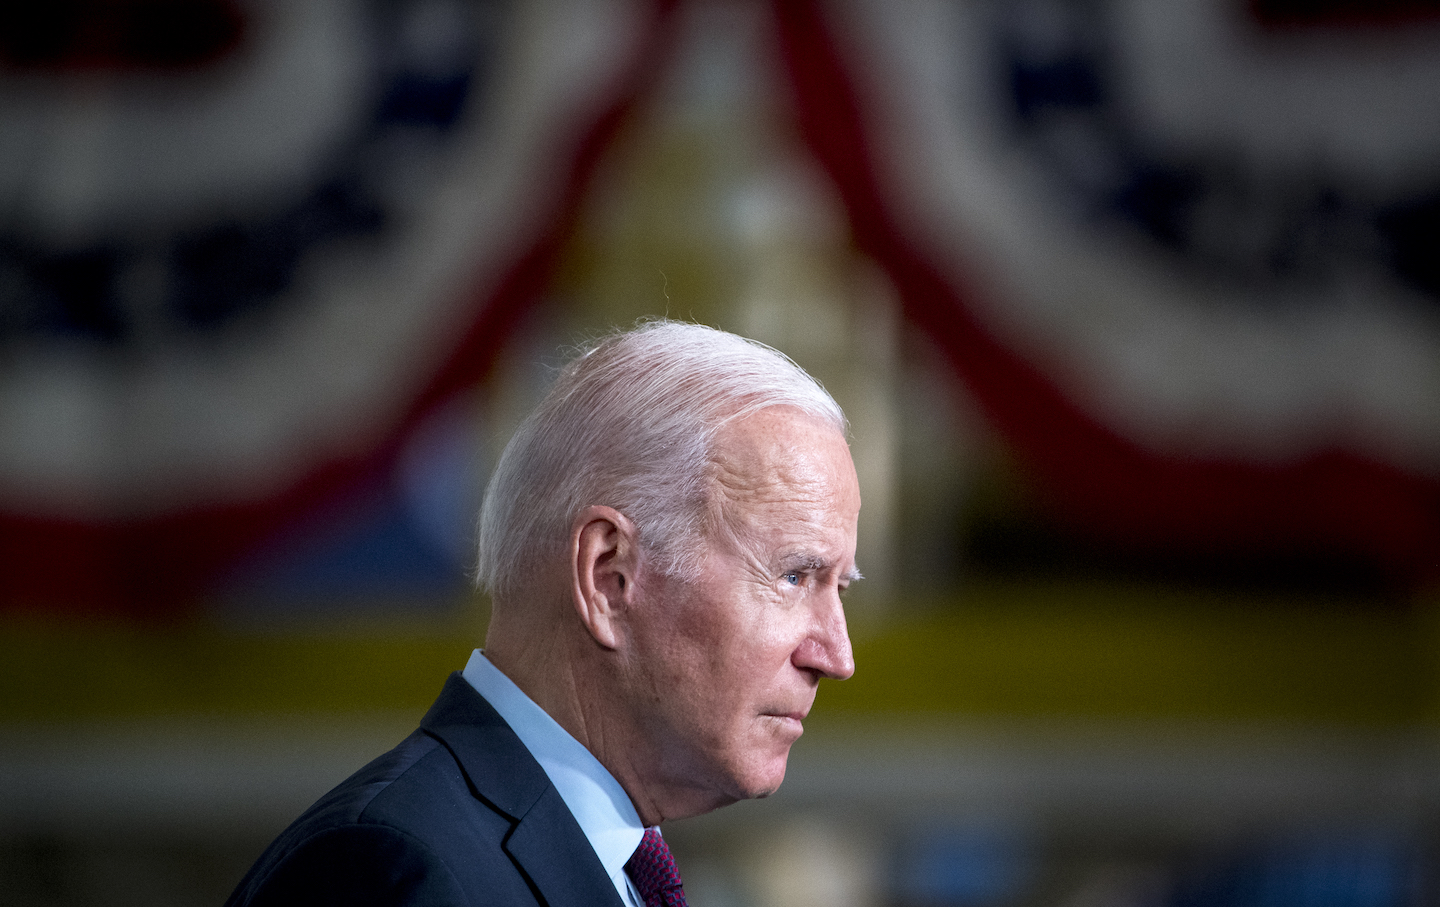 We Mobilized Young People to Support Biden. He’s Failing Us.